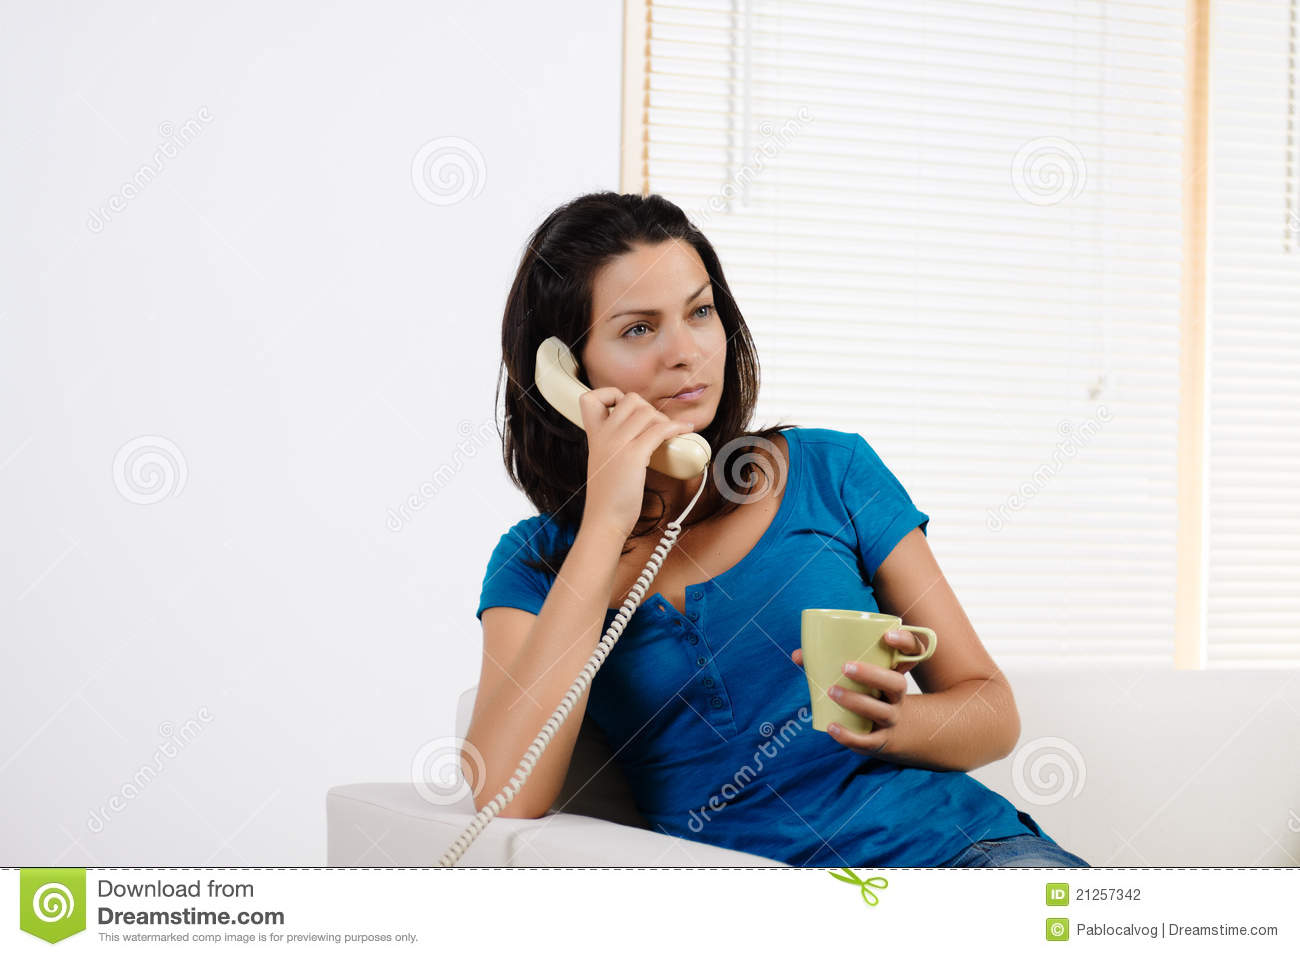 Angry Woman Talking On The Phone  Stock Photography   Image  21257342